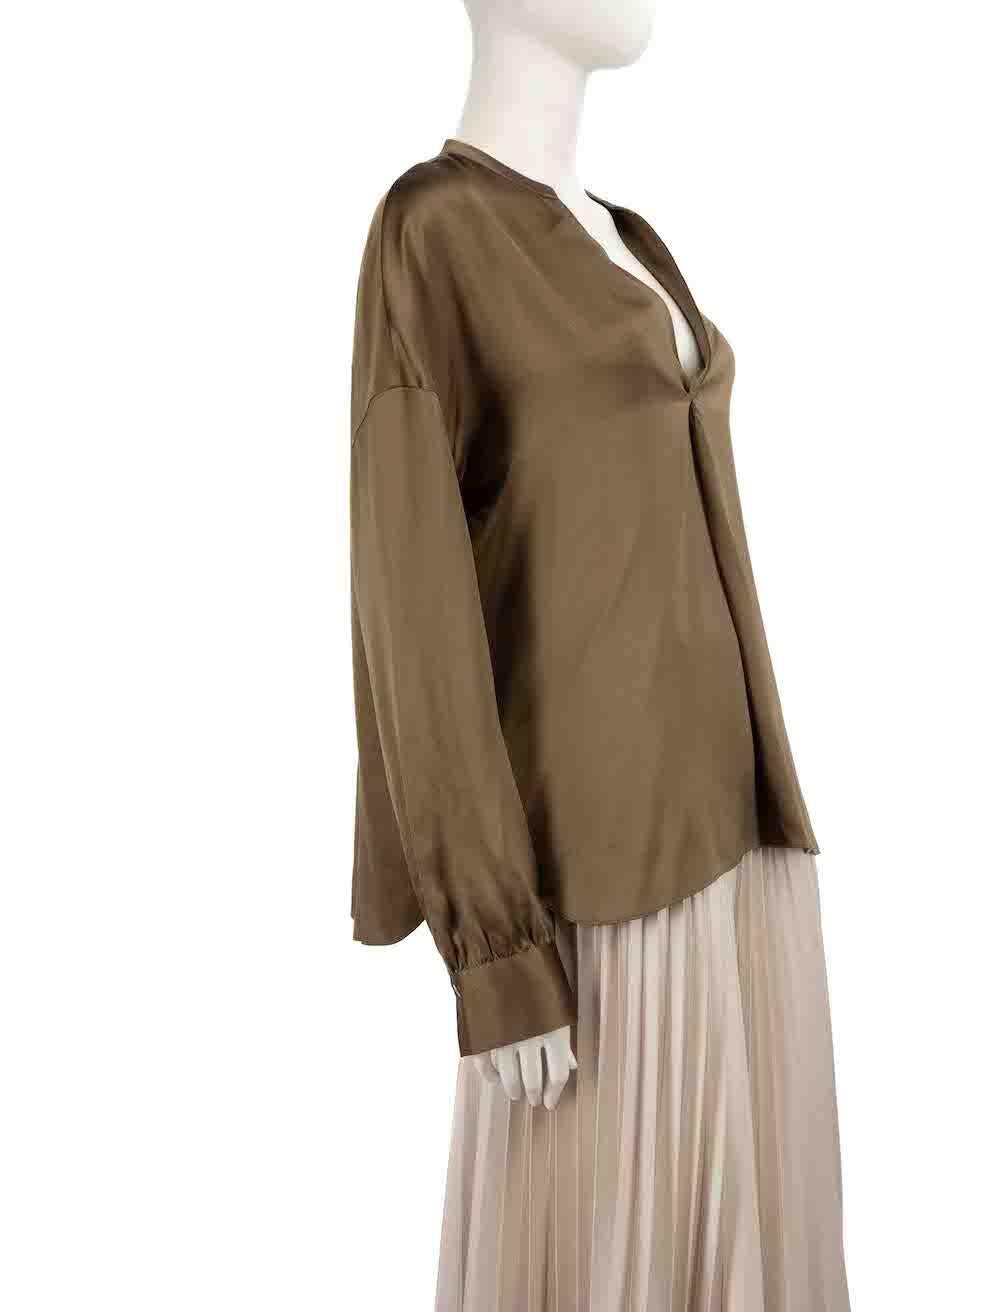 CONDITION is Very good. Hardly any visible wear to blouse is evident on this used Vince designer resale item.
 
 Details
 Khaki
 Silk
 Blouse
 V-neck
 Long sleeves
 Buttoned cuffs
 
 
 Made in China
 
 Composition
 100% Silk
 
 Care instructions: